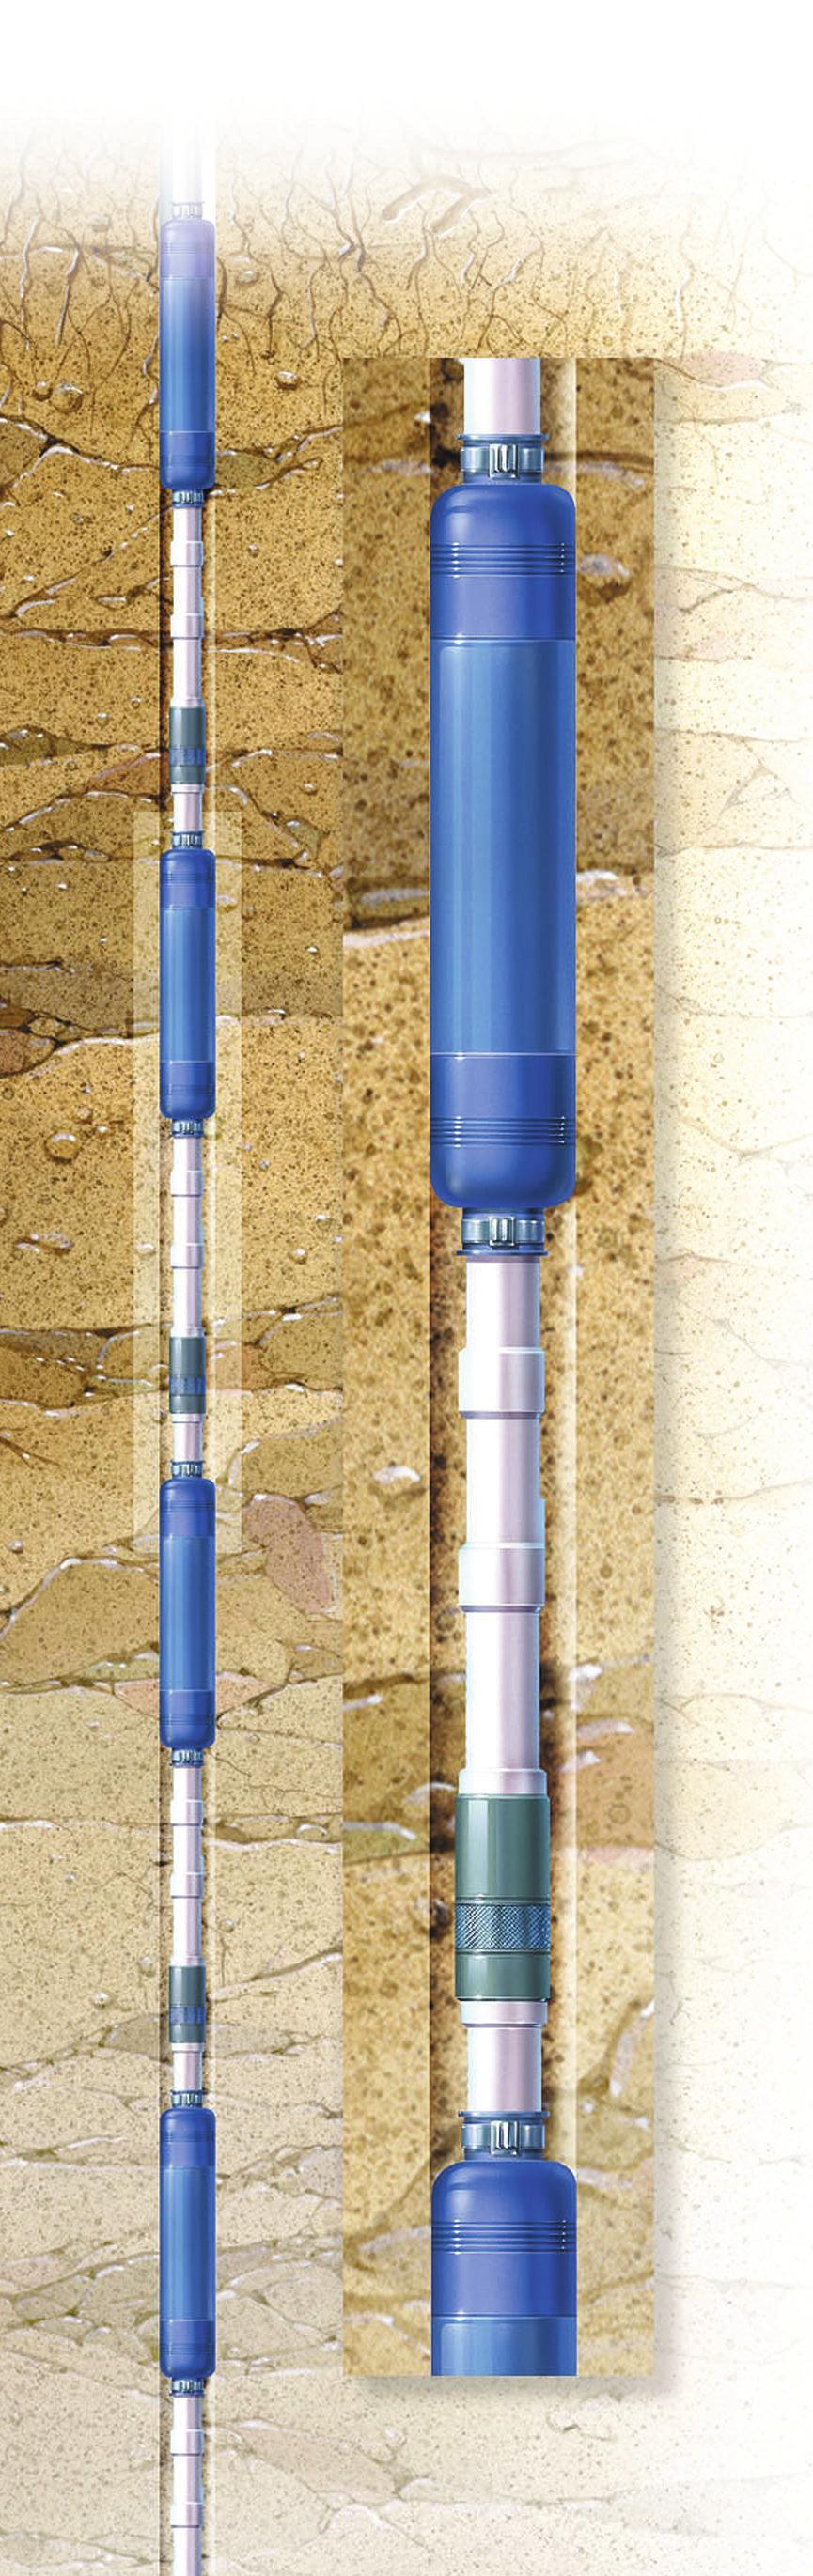 Westbay System Flexible, industry-tested design offers Superior Performance OVERVIEW The Westbay System is a completely versatile, multilevel monitoring technology that allows testing of hydraulic